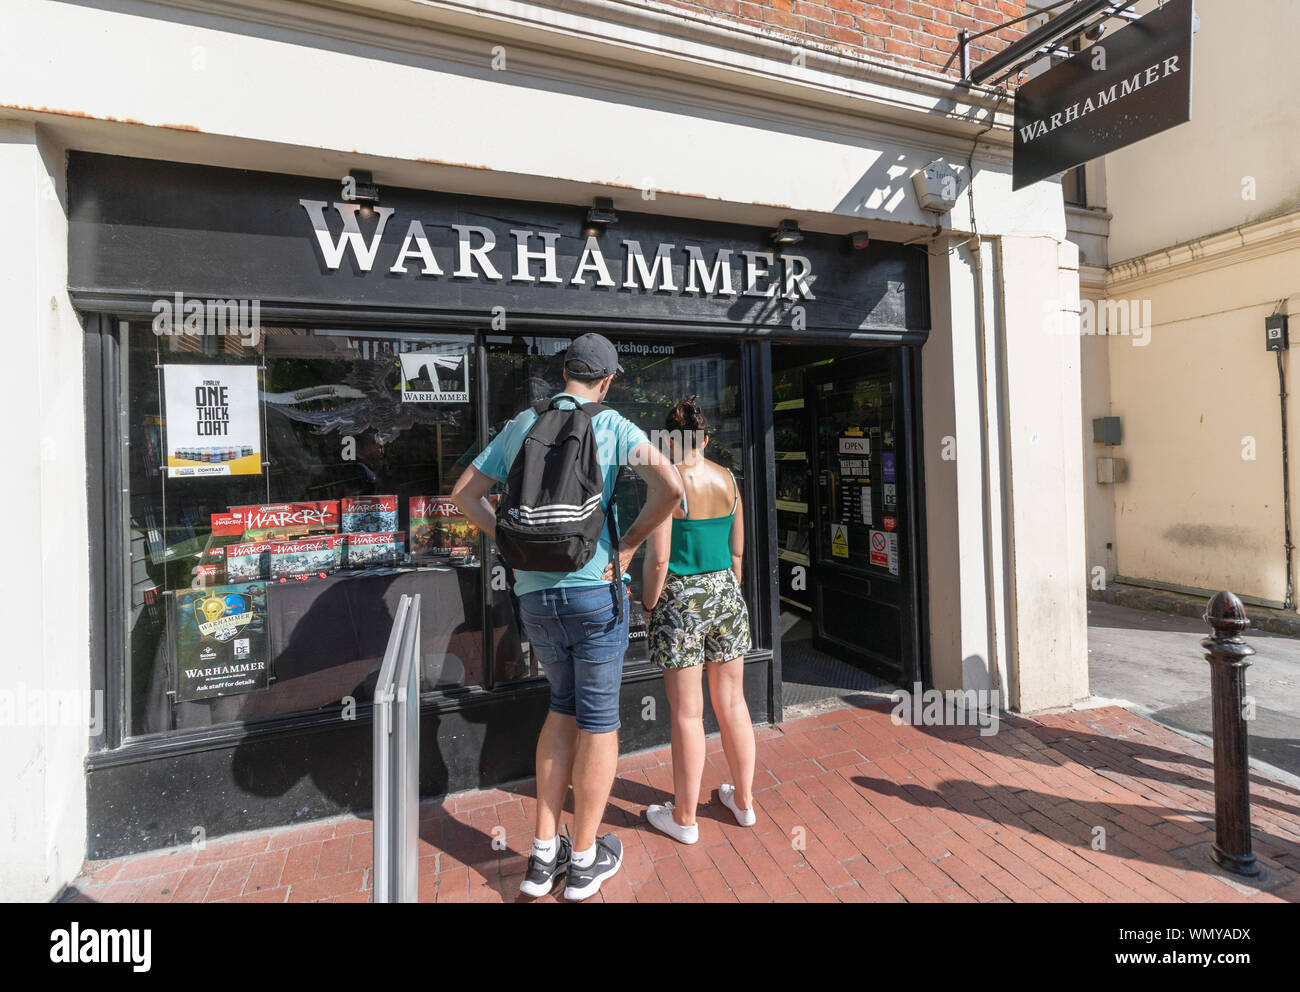 Brighton / UK - August 25th 2019 - Warhammer shop front. Warhammer is a retailer of fantasy board games, also selling miniatures for painting Stock Photo